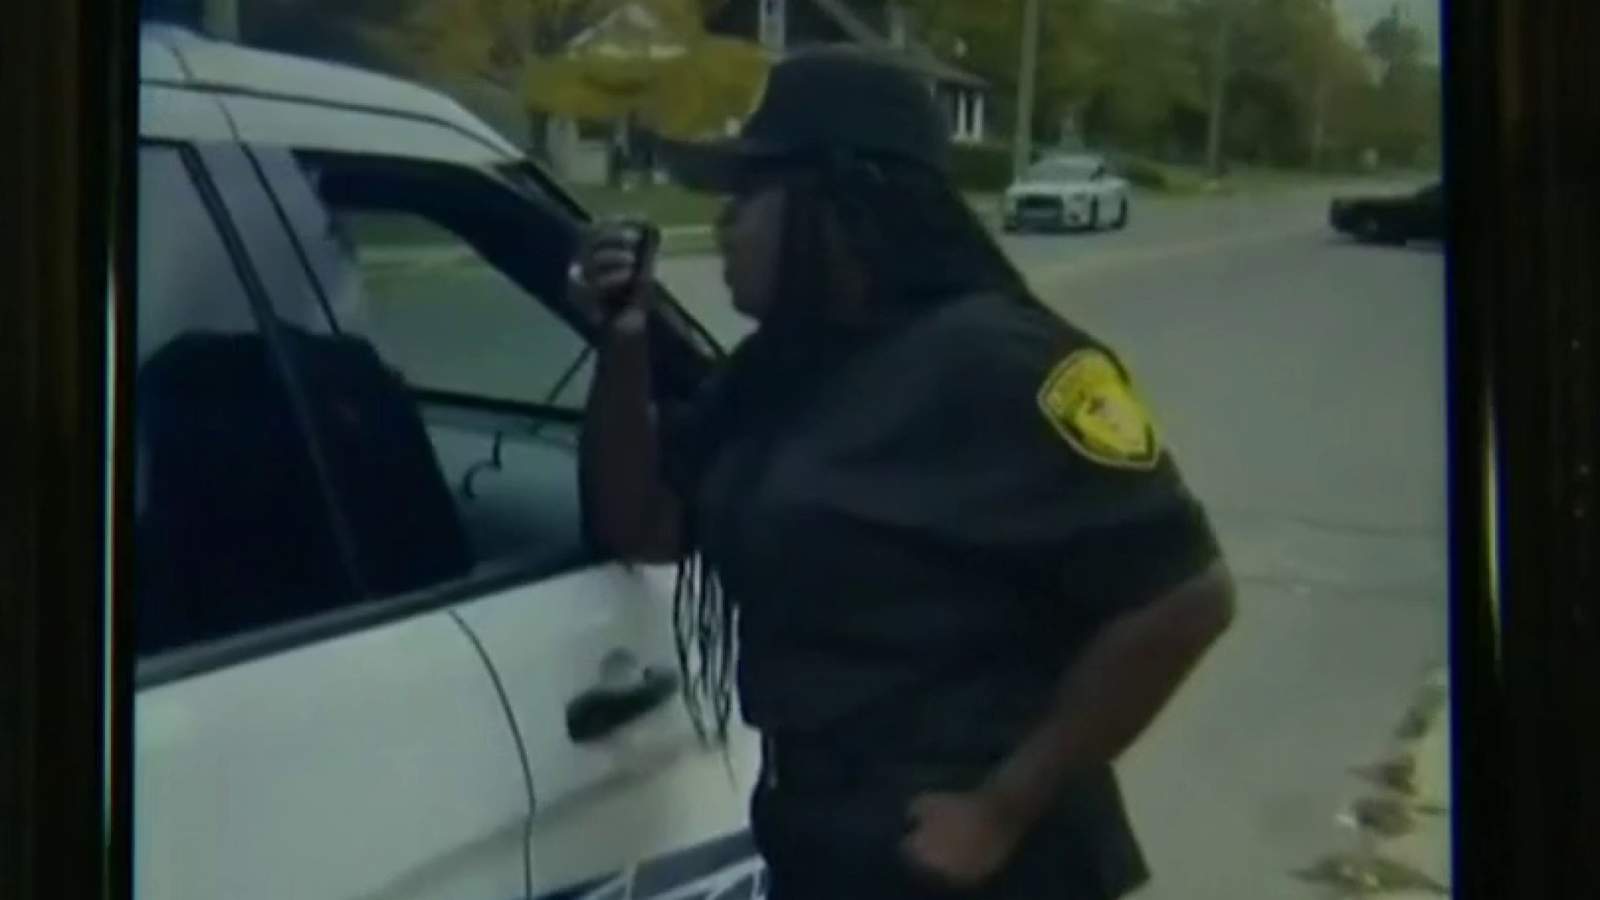 Video of police chaplain praying for Detroit goes viral